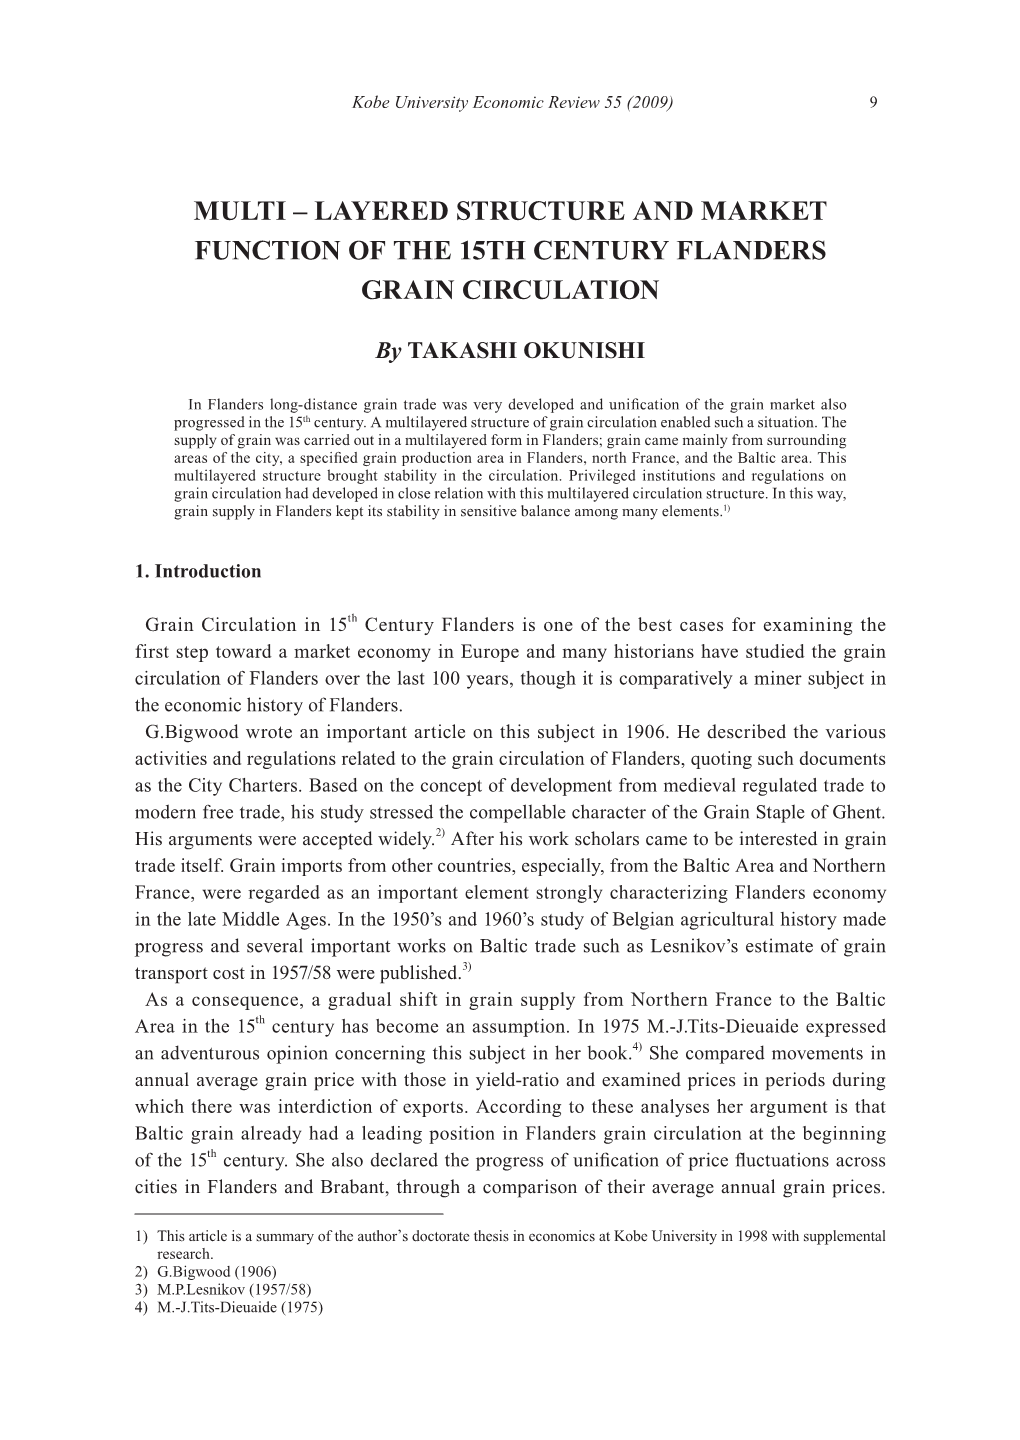 Layered Structure and Market Function of the 15Th Century Flanders Grain Circulation